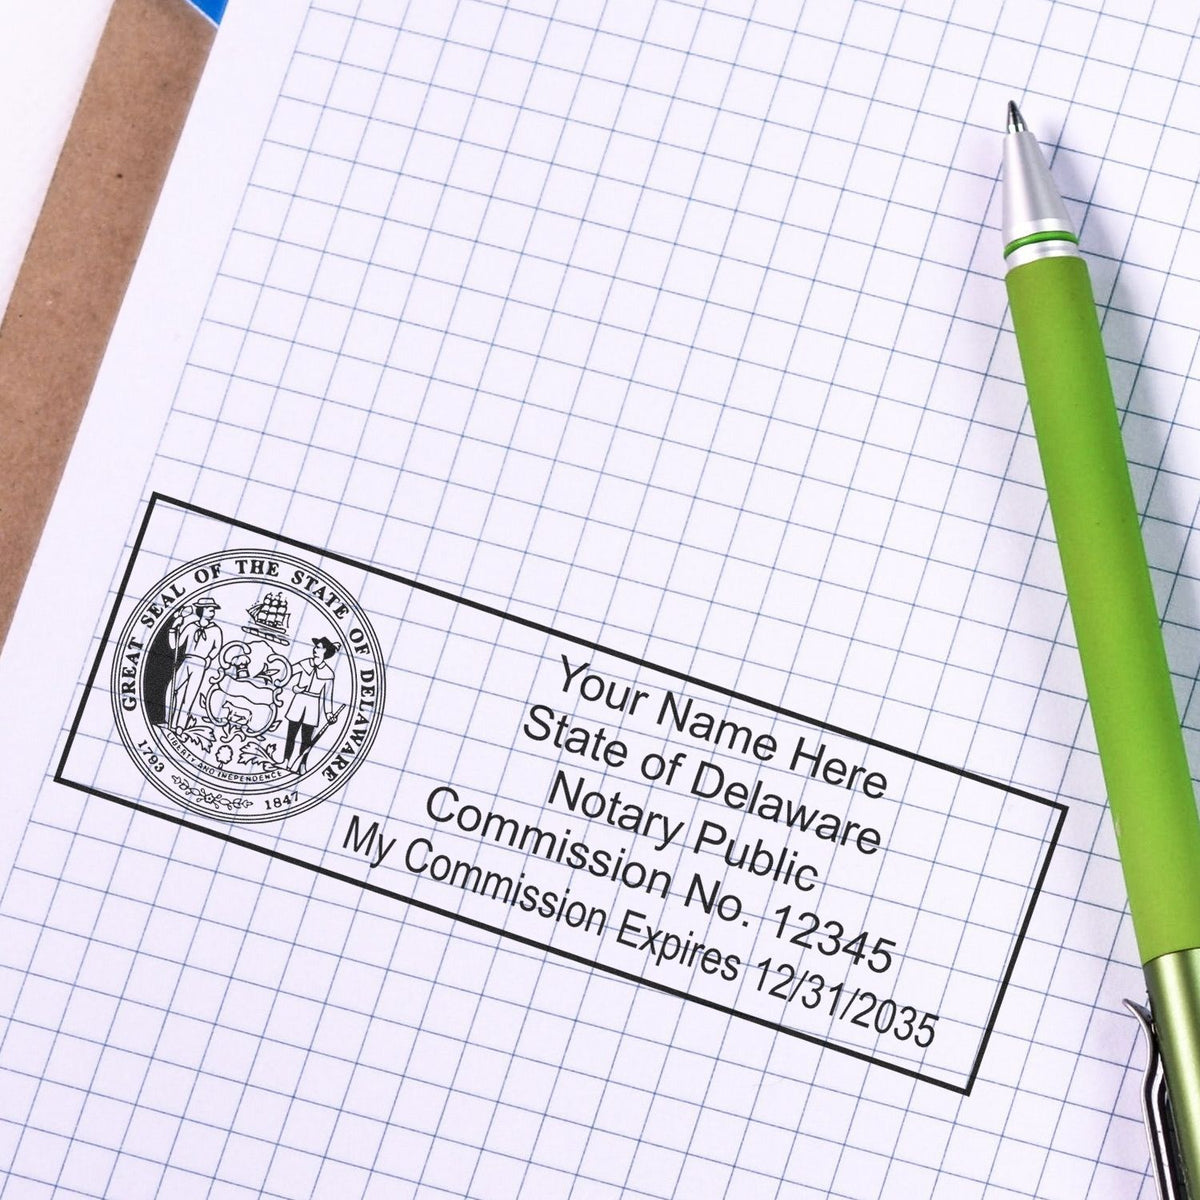 The Slim Pre-Inked State Seal Notary Stamp for Delaware stamp impression comes to life with a crisp, detailed photo on paper - showcasing true professional quality.